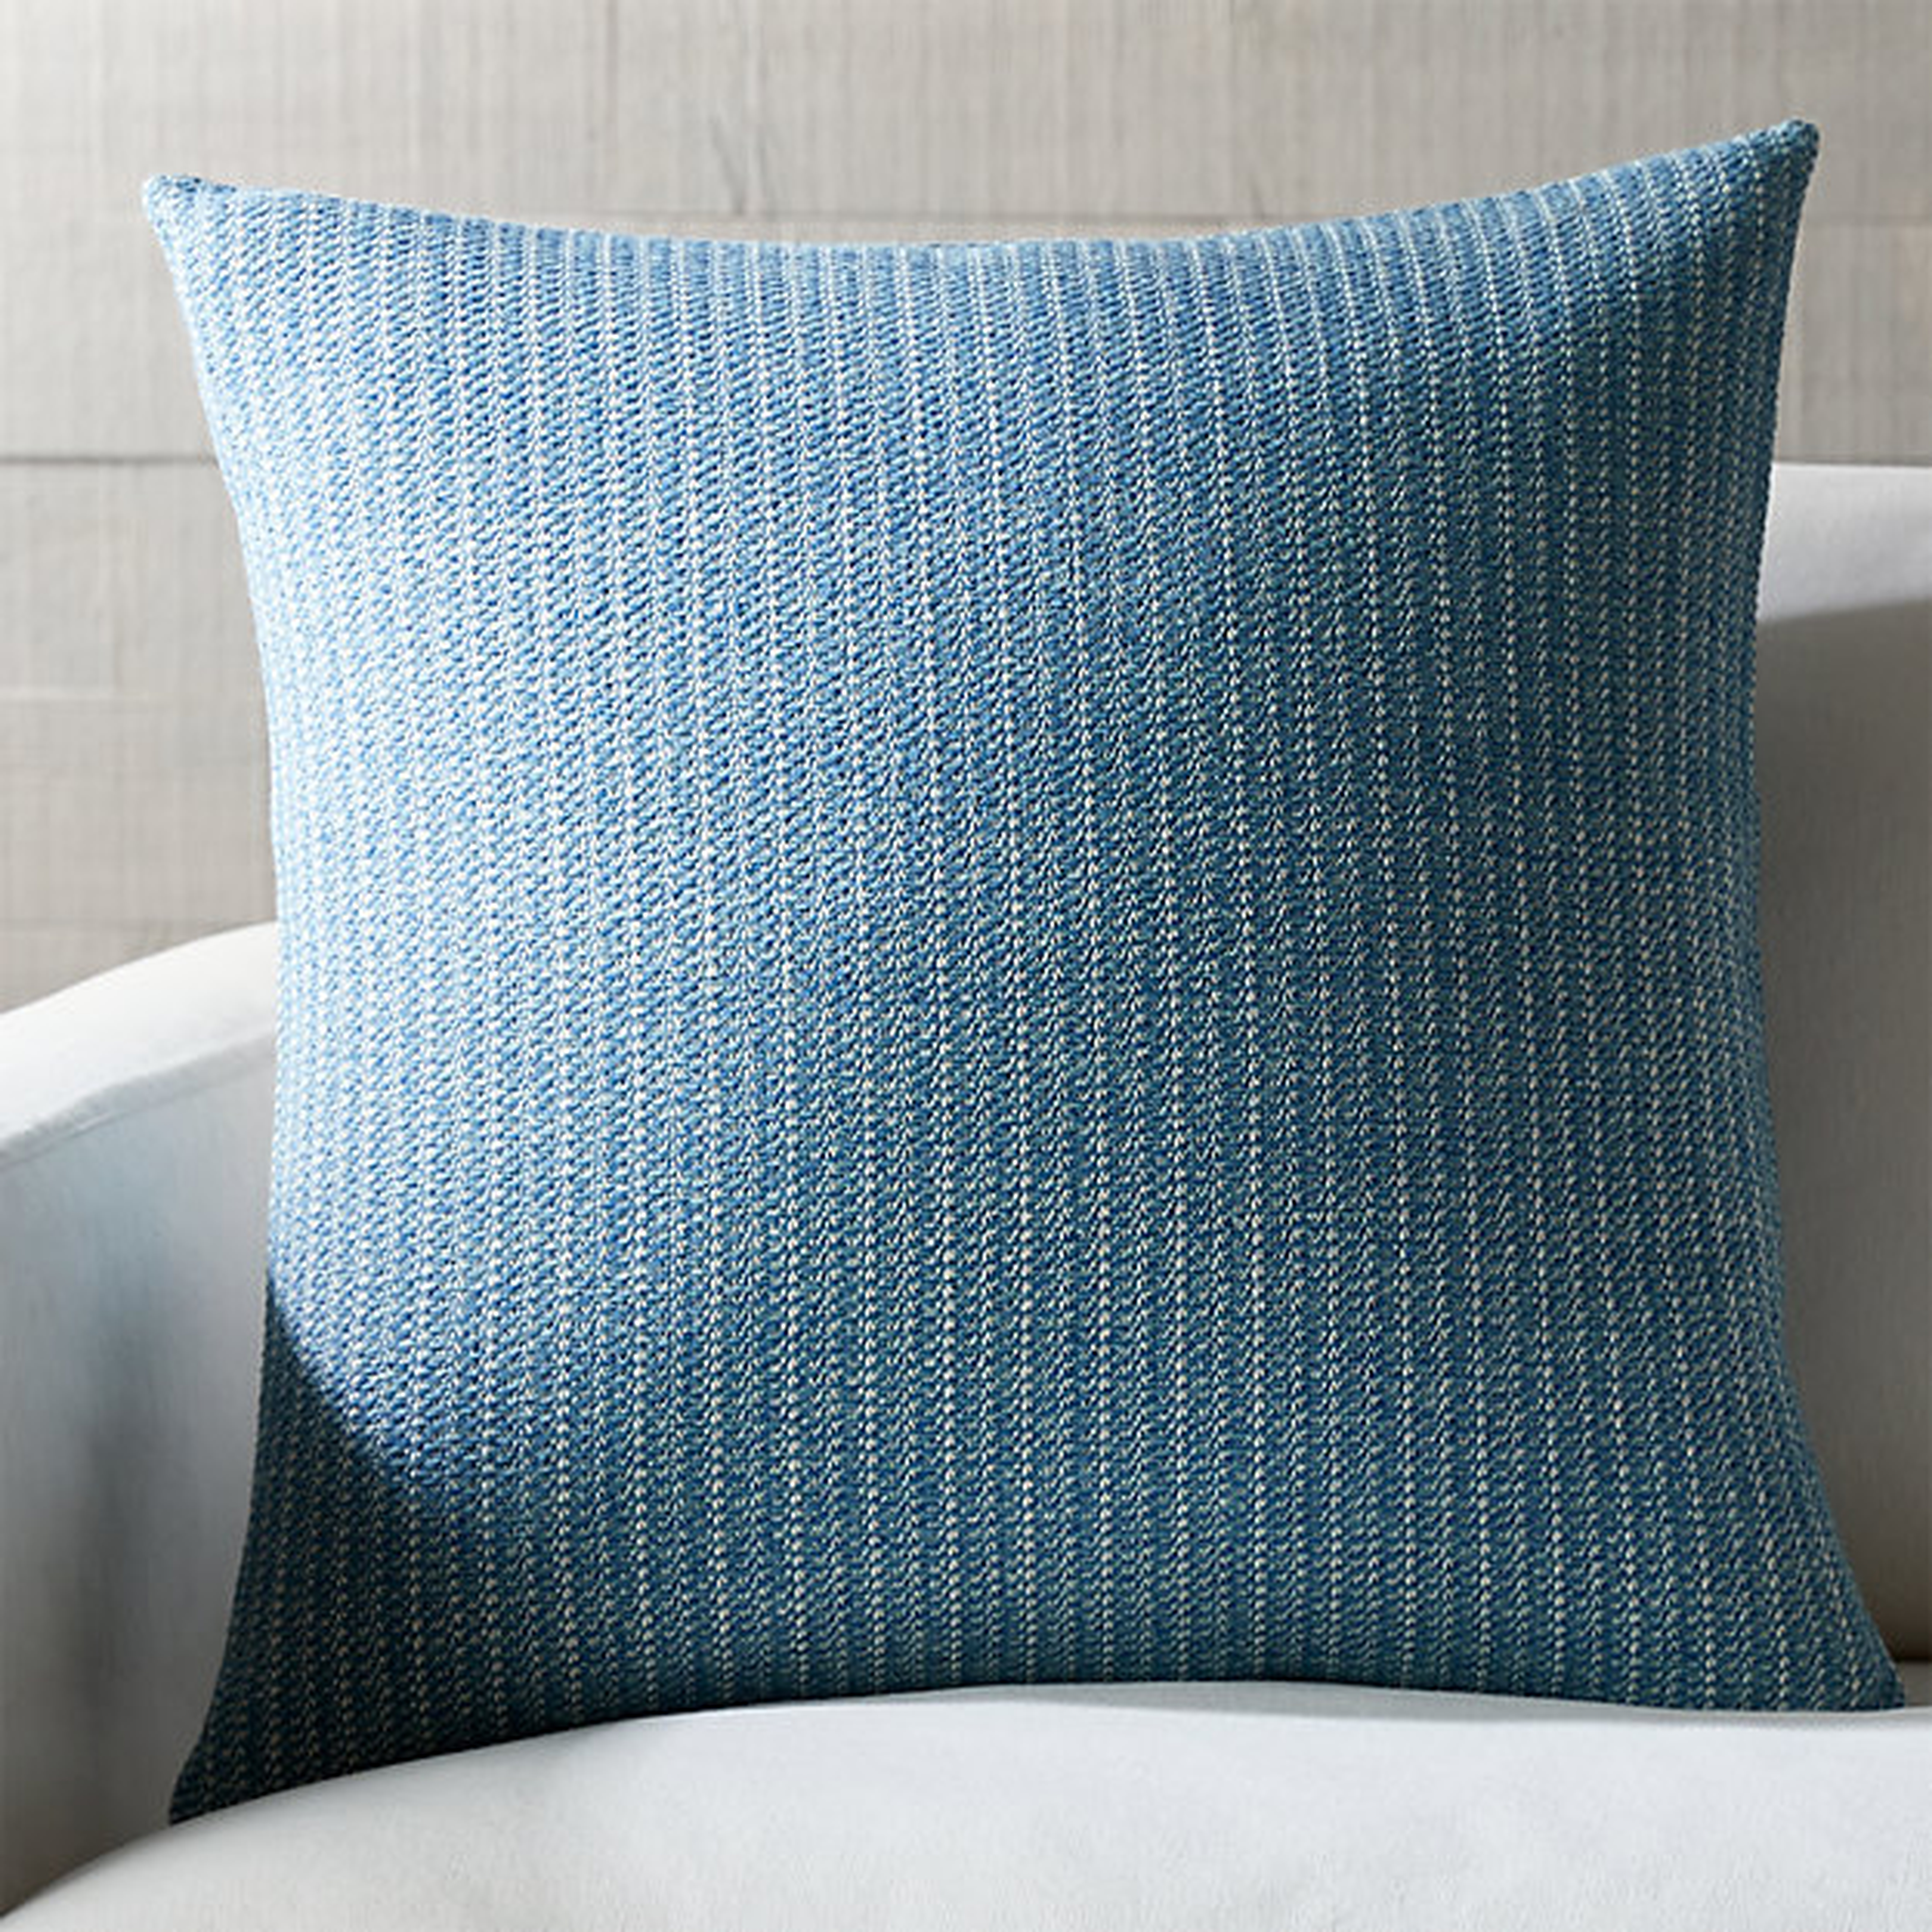 Liano Azure Monochrome Pillow Cover 23" - Crate and Barrel